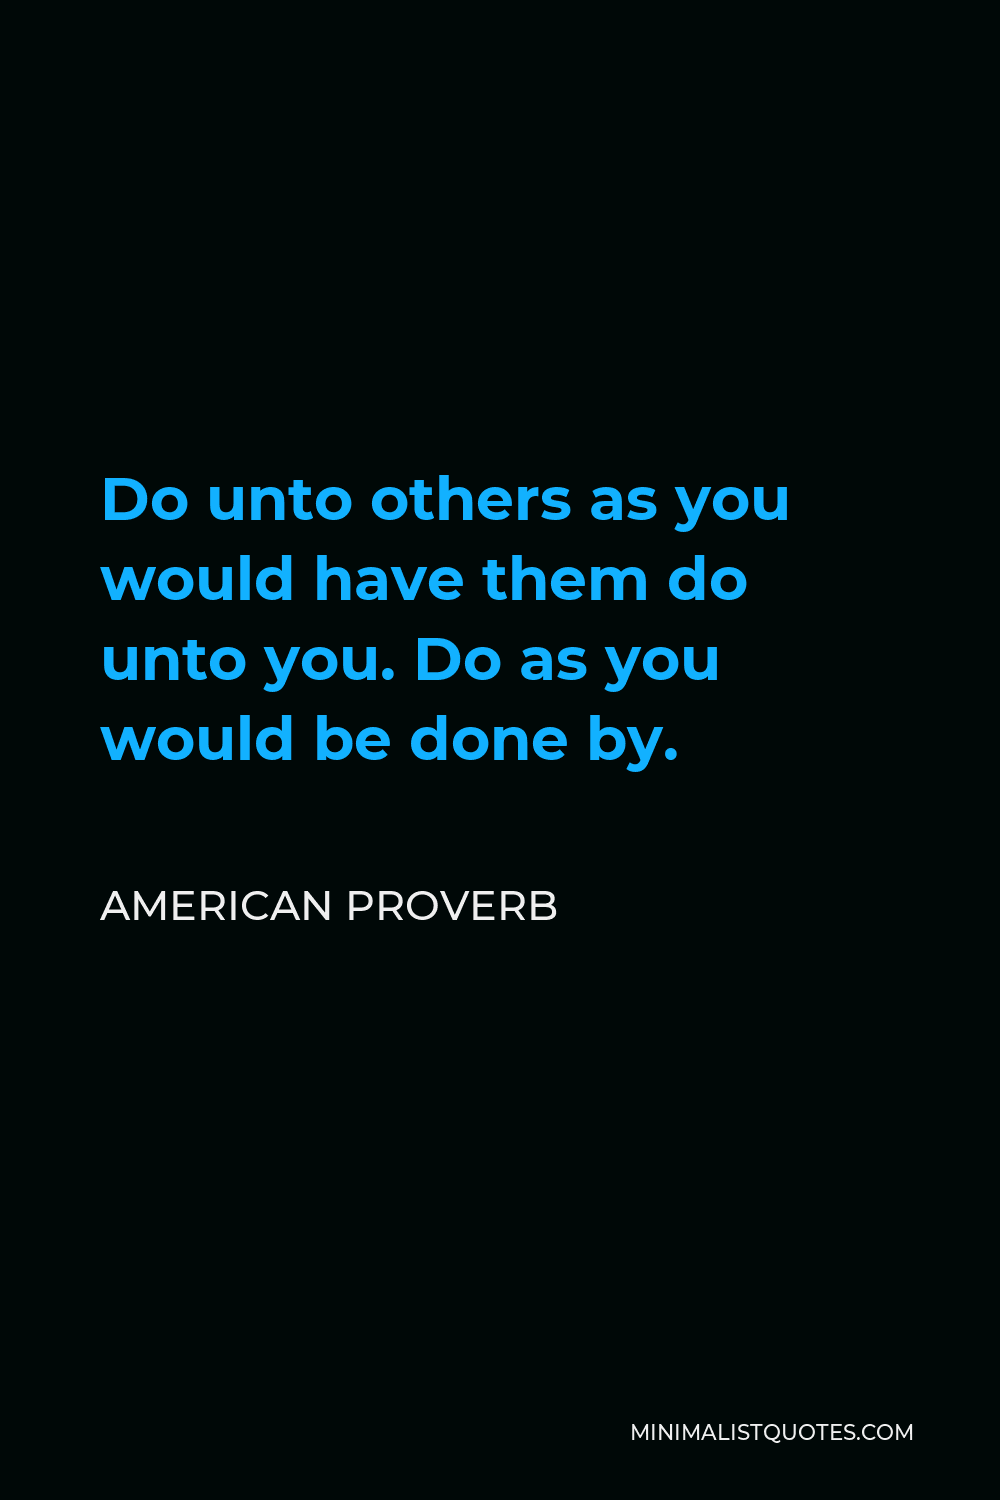 American Proverb Quote - Do unto others as you would have them do unto you. Do as you would be done by.